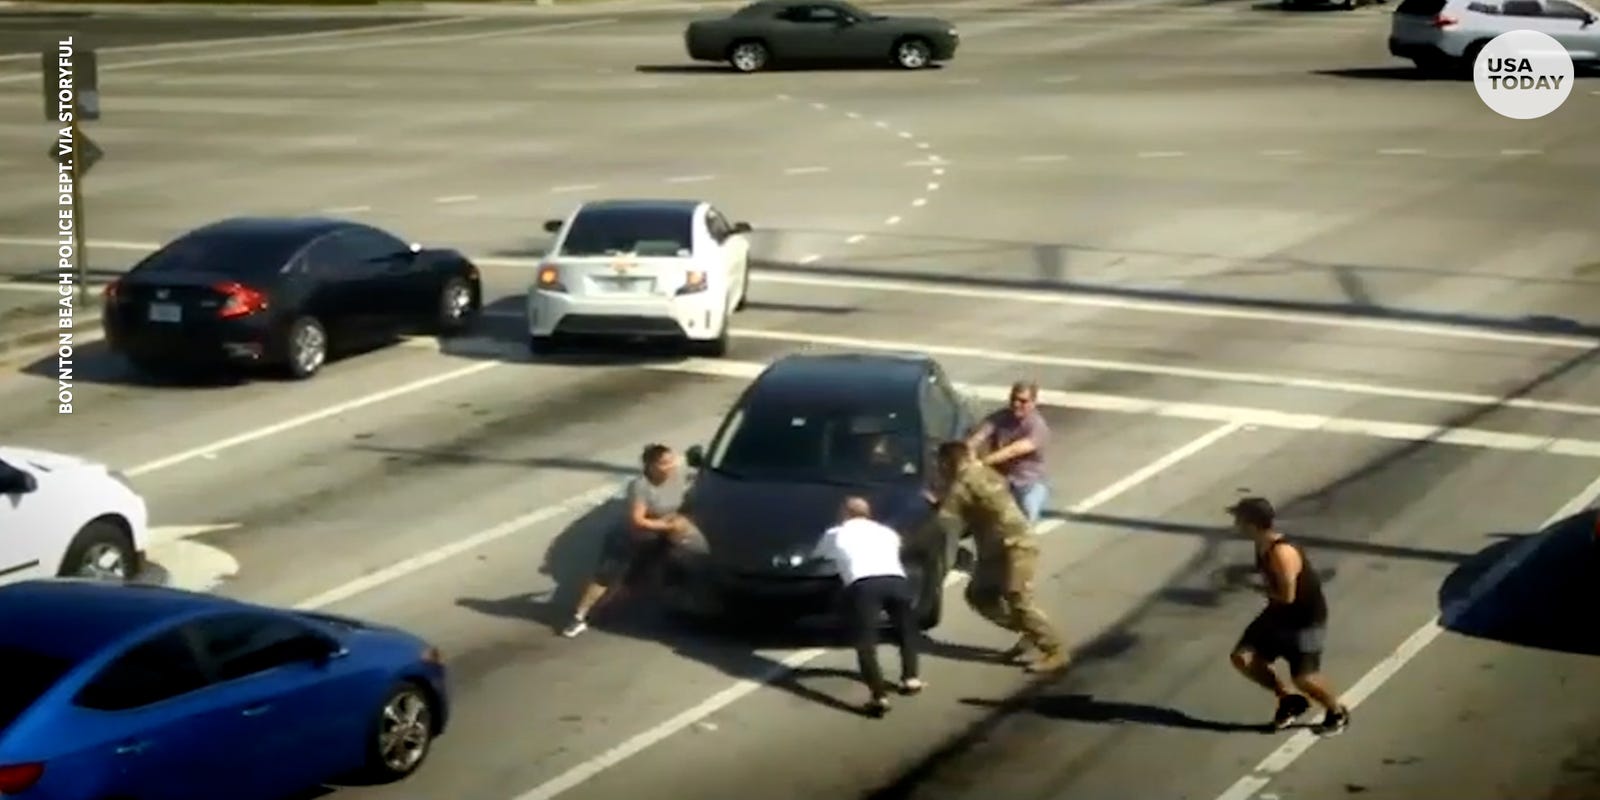 Video shows people saving woman having medical episode while driving